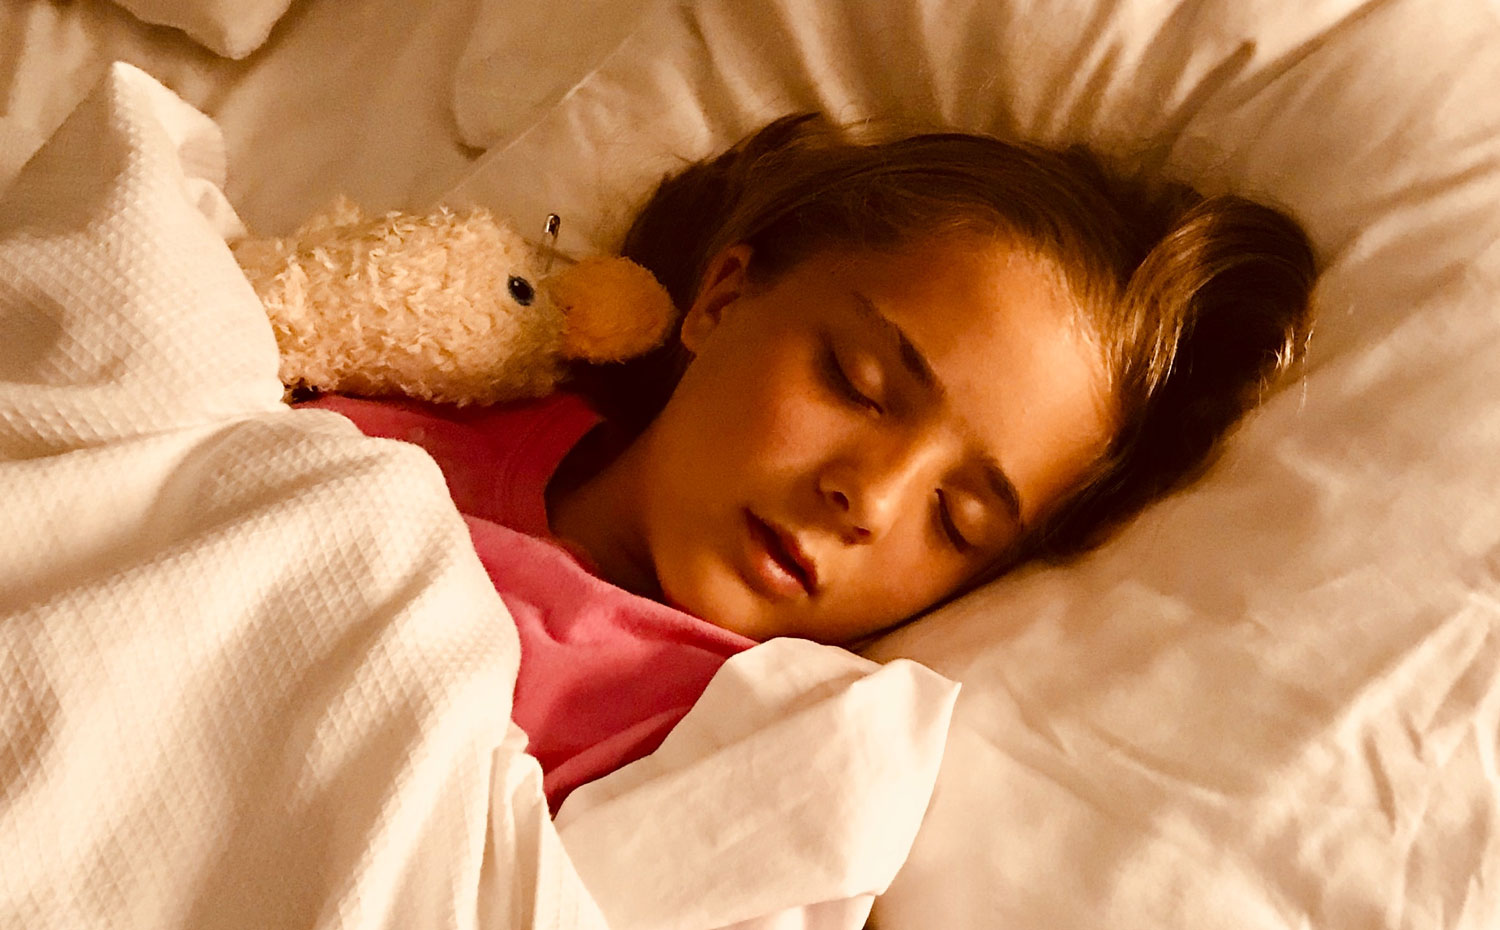 4)	Get some rest! The bones in your body are in the tail end of their maturing process, and they require rest to become as long and strong as possible. Getting the daily 8-9 hours of sleep is as important now as they were when you were a child.